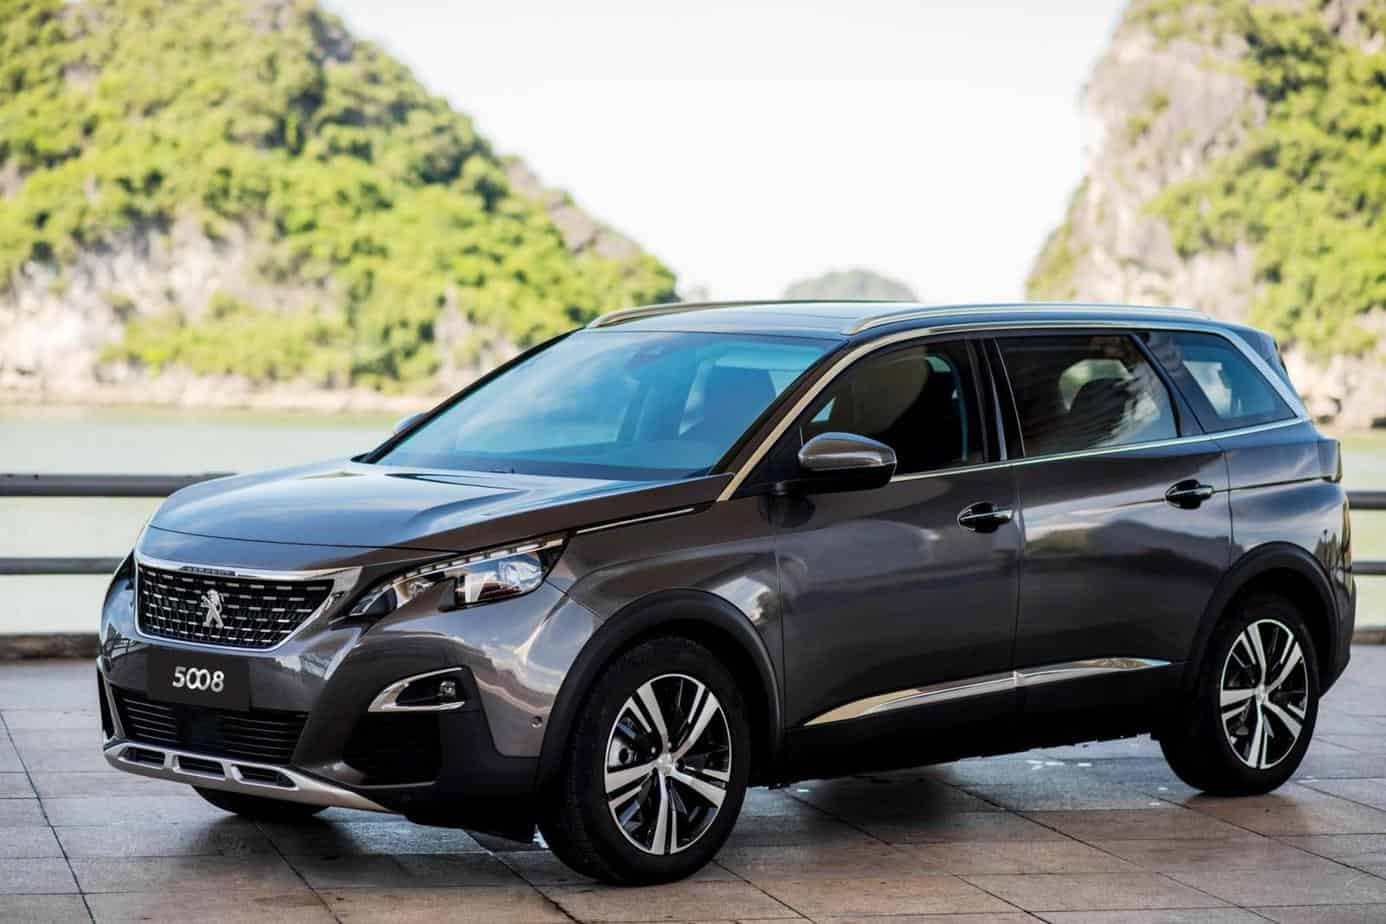 Finding a reliable repair center for Peugeot cars is very necessary